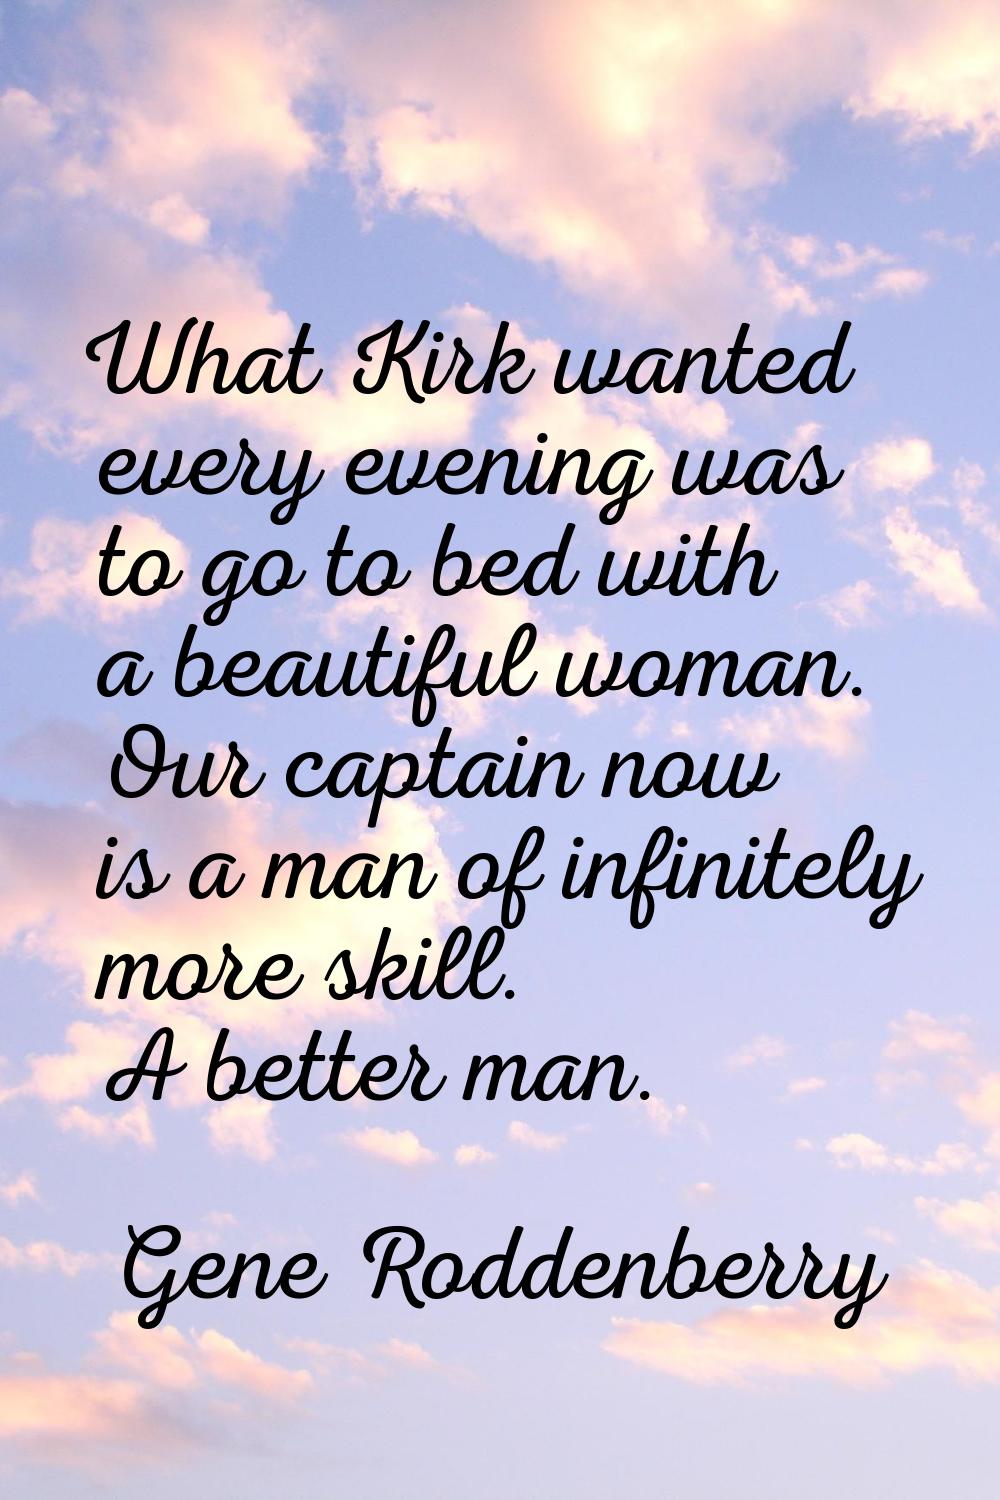 What Kirk wanted every evening was to go to bed with a beautiful woman. Our captain now is a man of